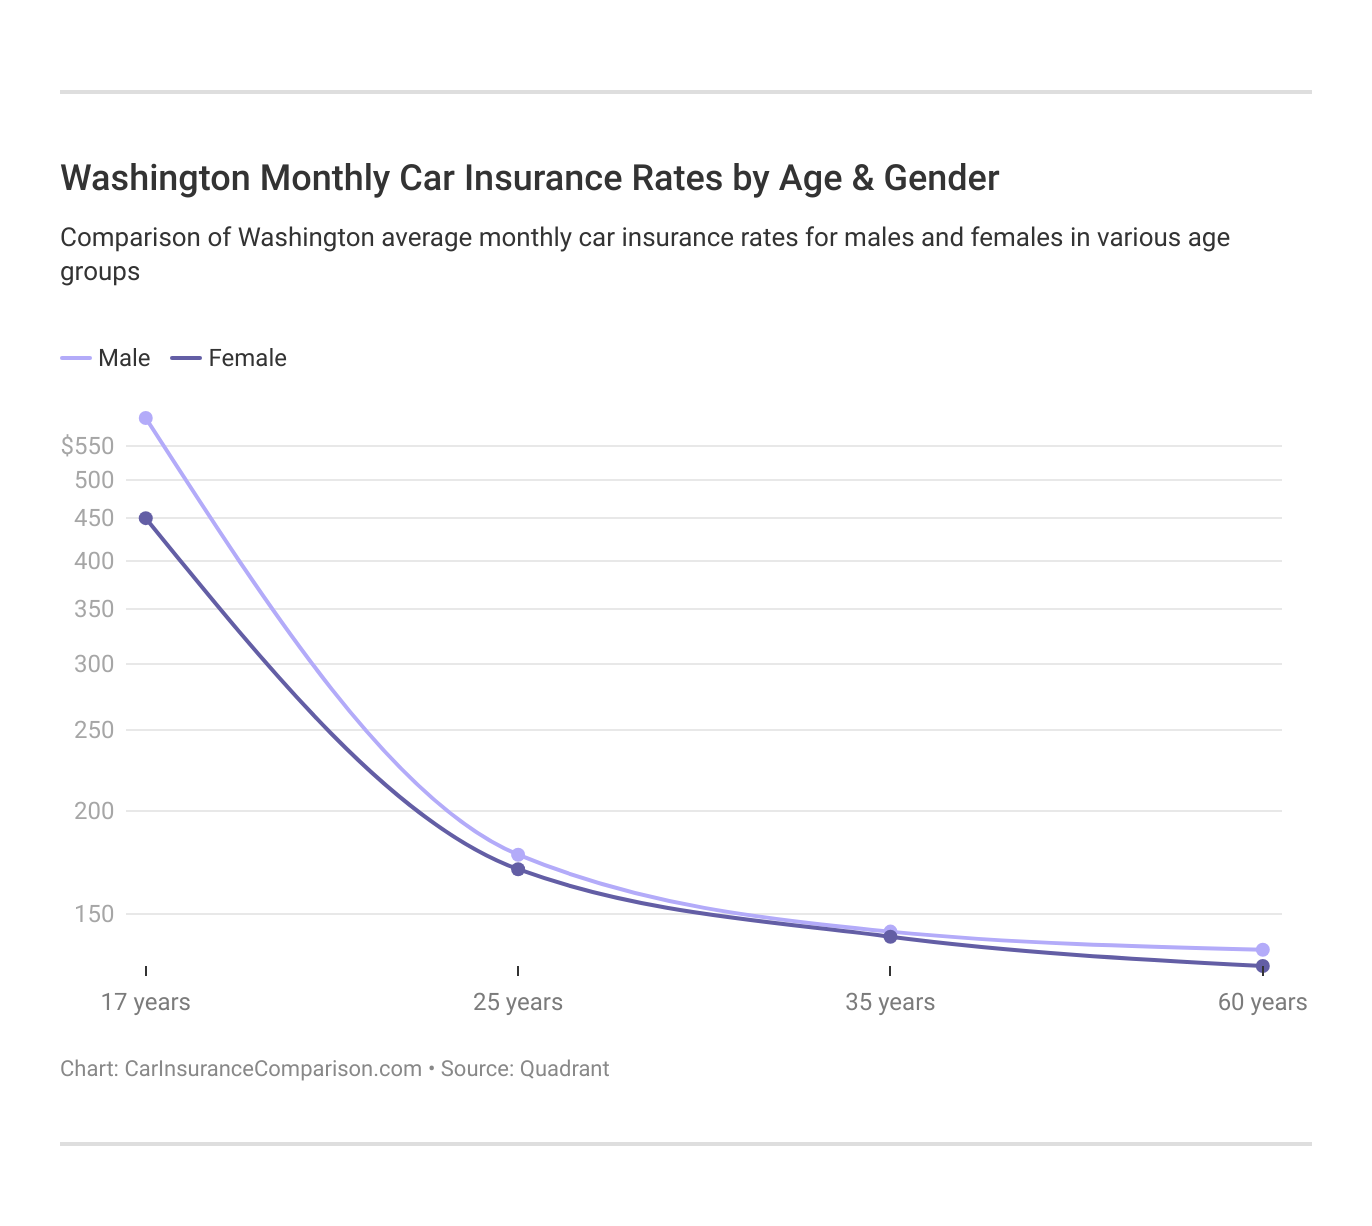 <h3>Washington Monthly Car Insurance Rates by Age & Gender</h3>